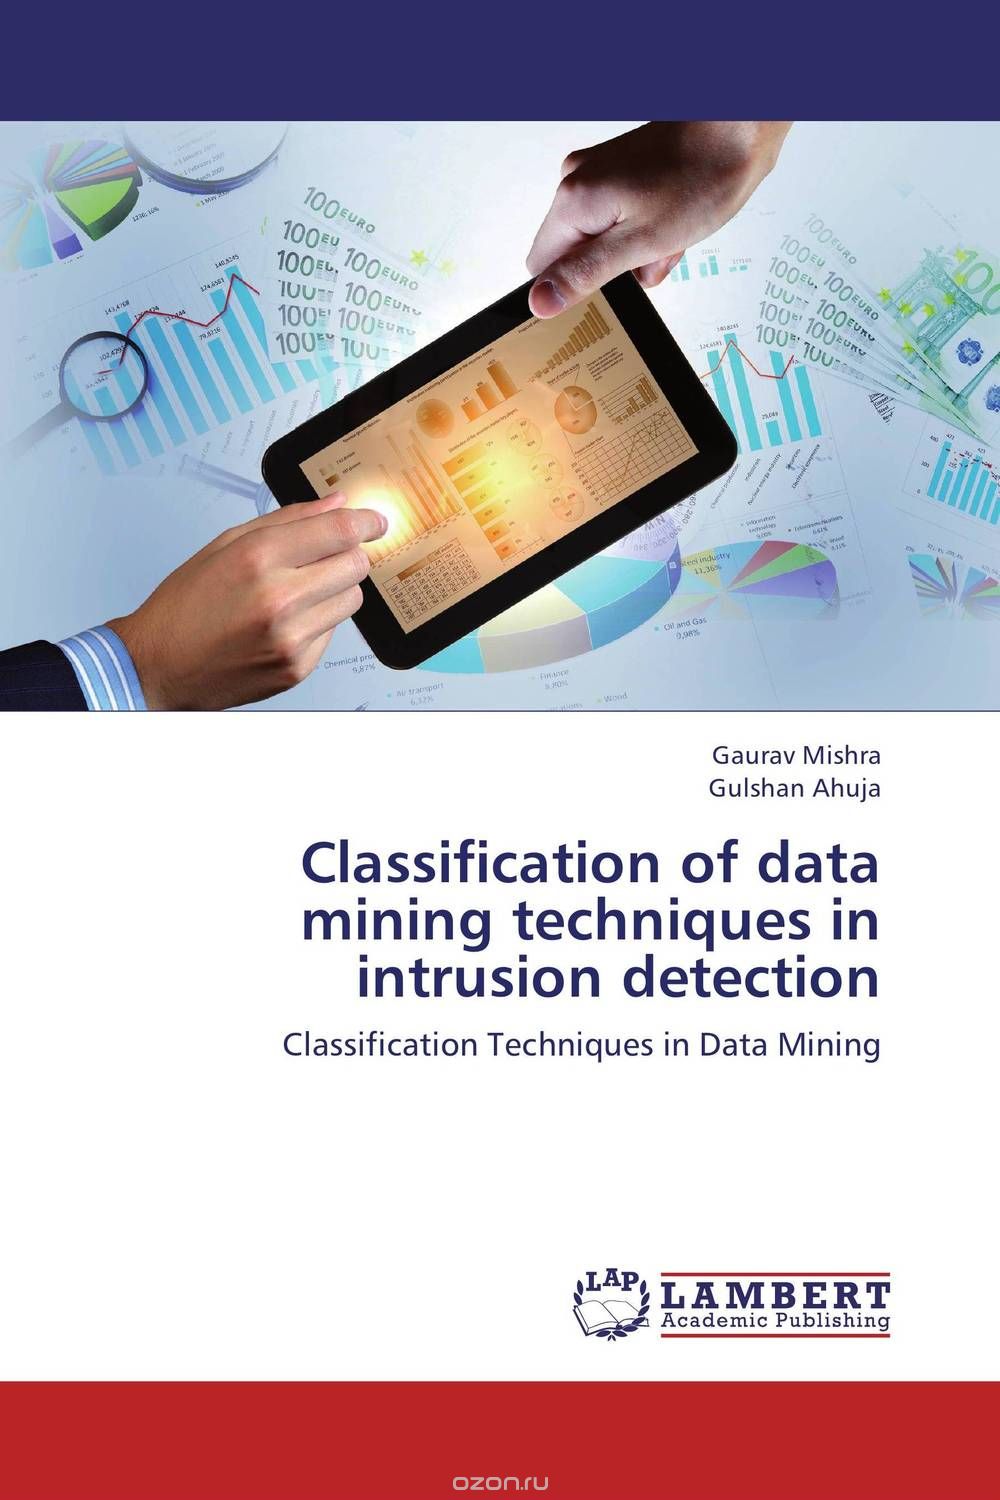 Classification of data mining techniques in intrusion detection